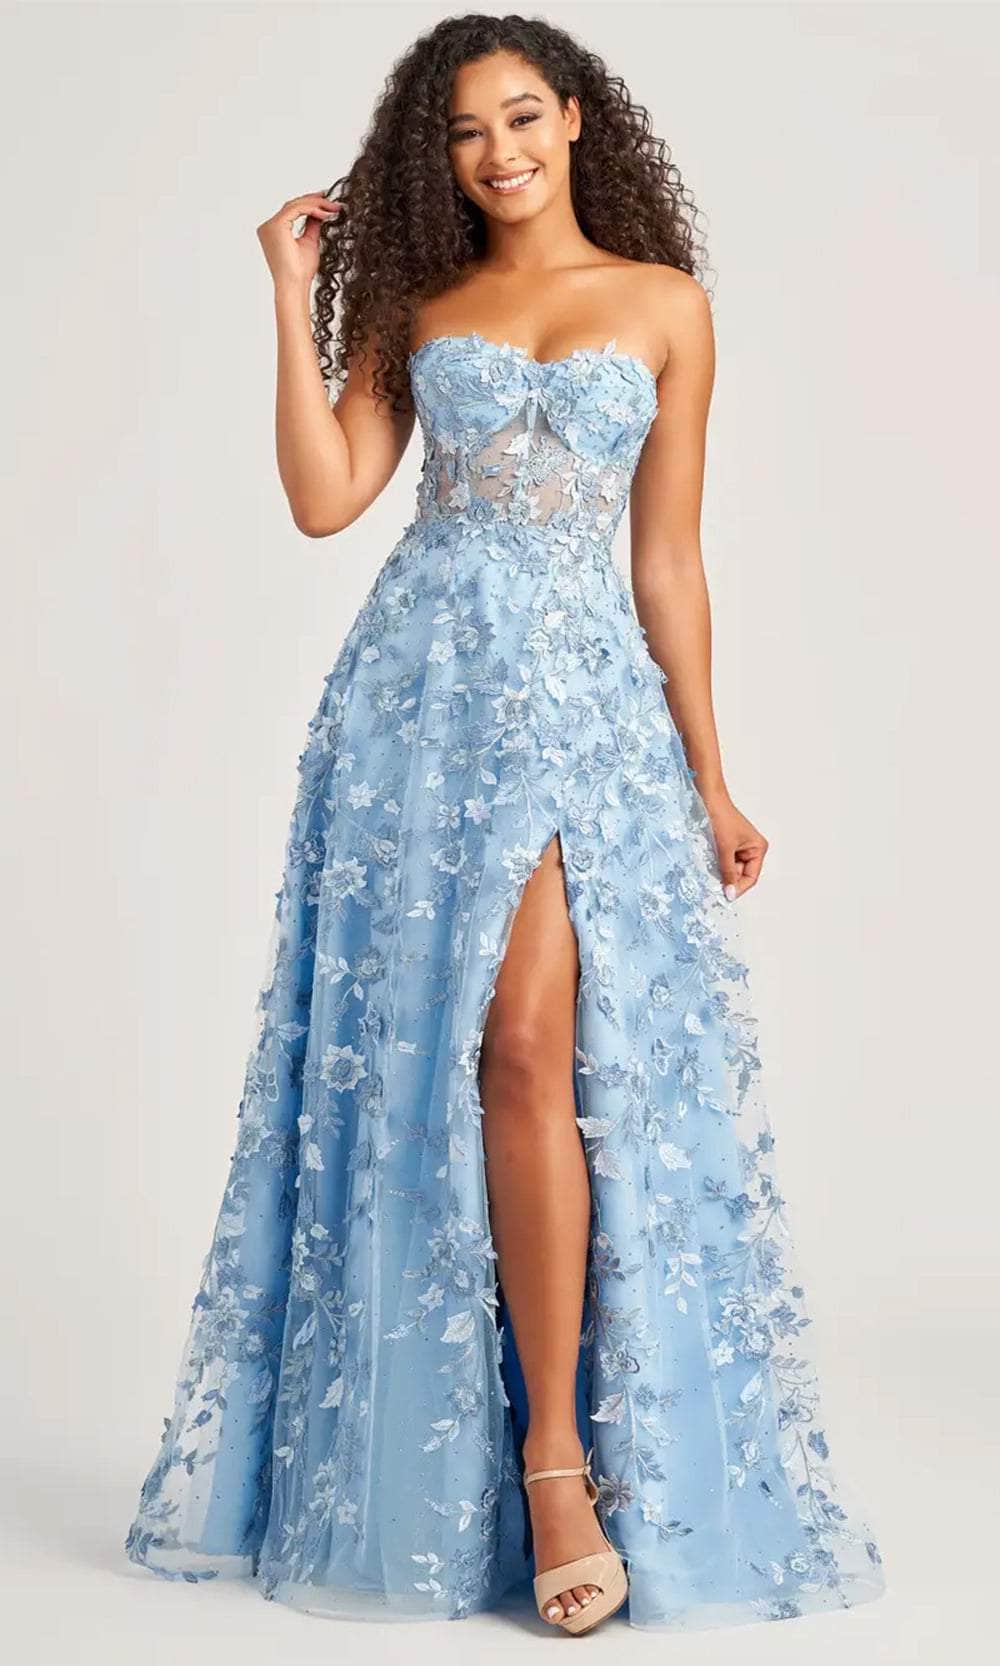 Colette By Daphne CL5249 - Beaded Lace Prom Dress Prom Dresses 00 / Light Blue